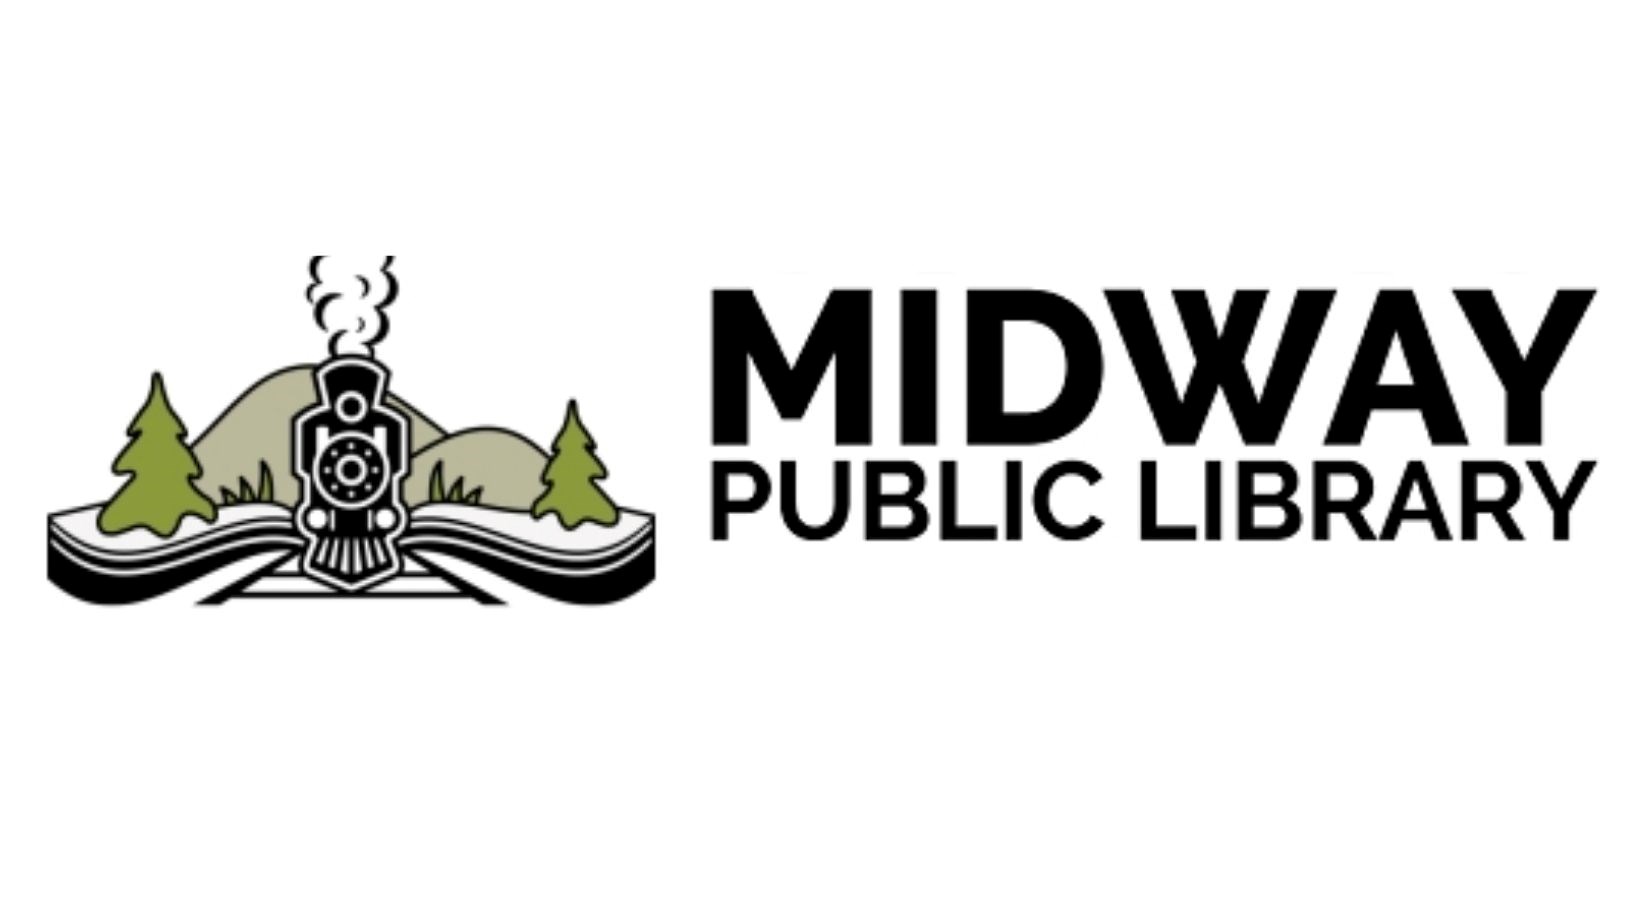 Midway Public Library